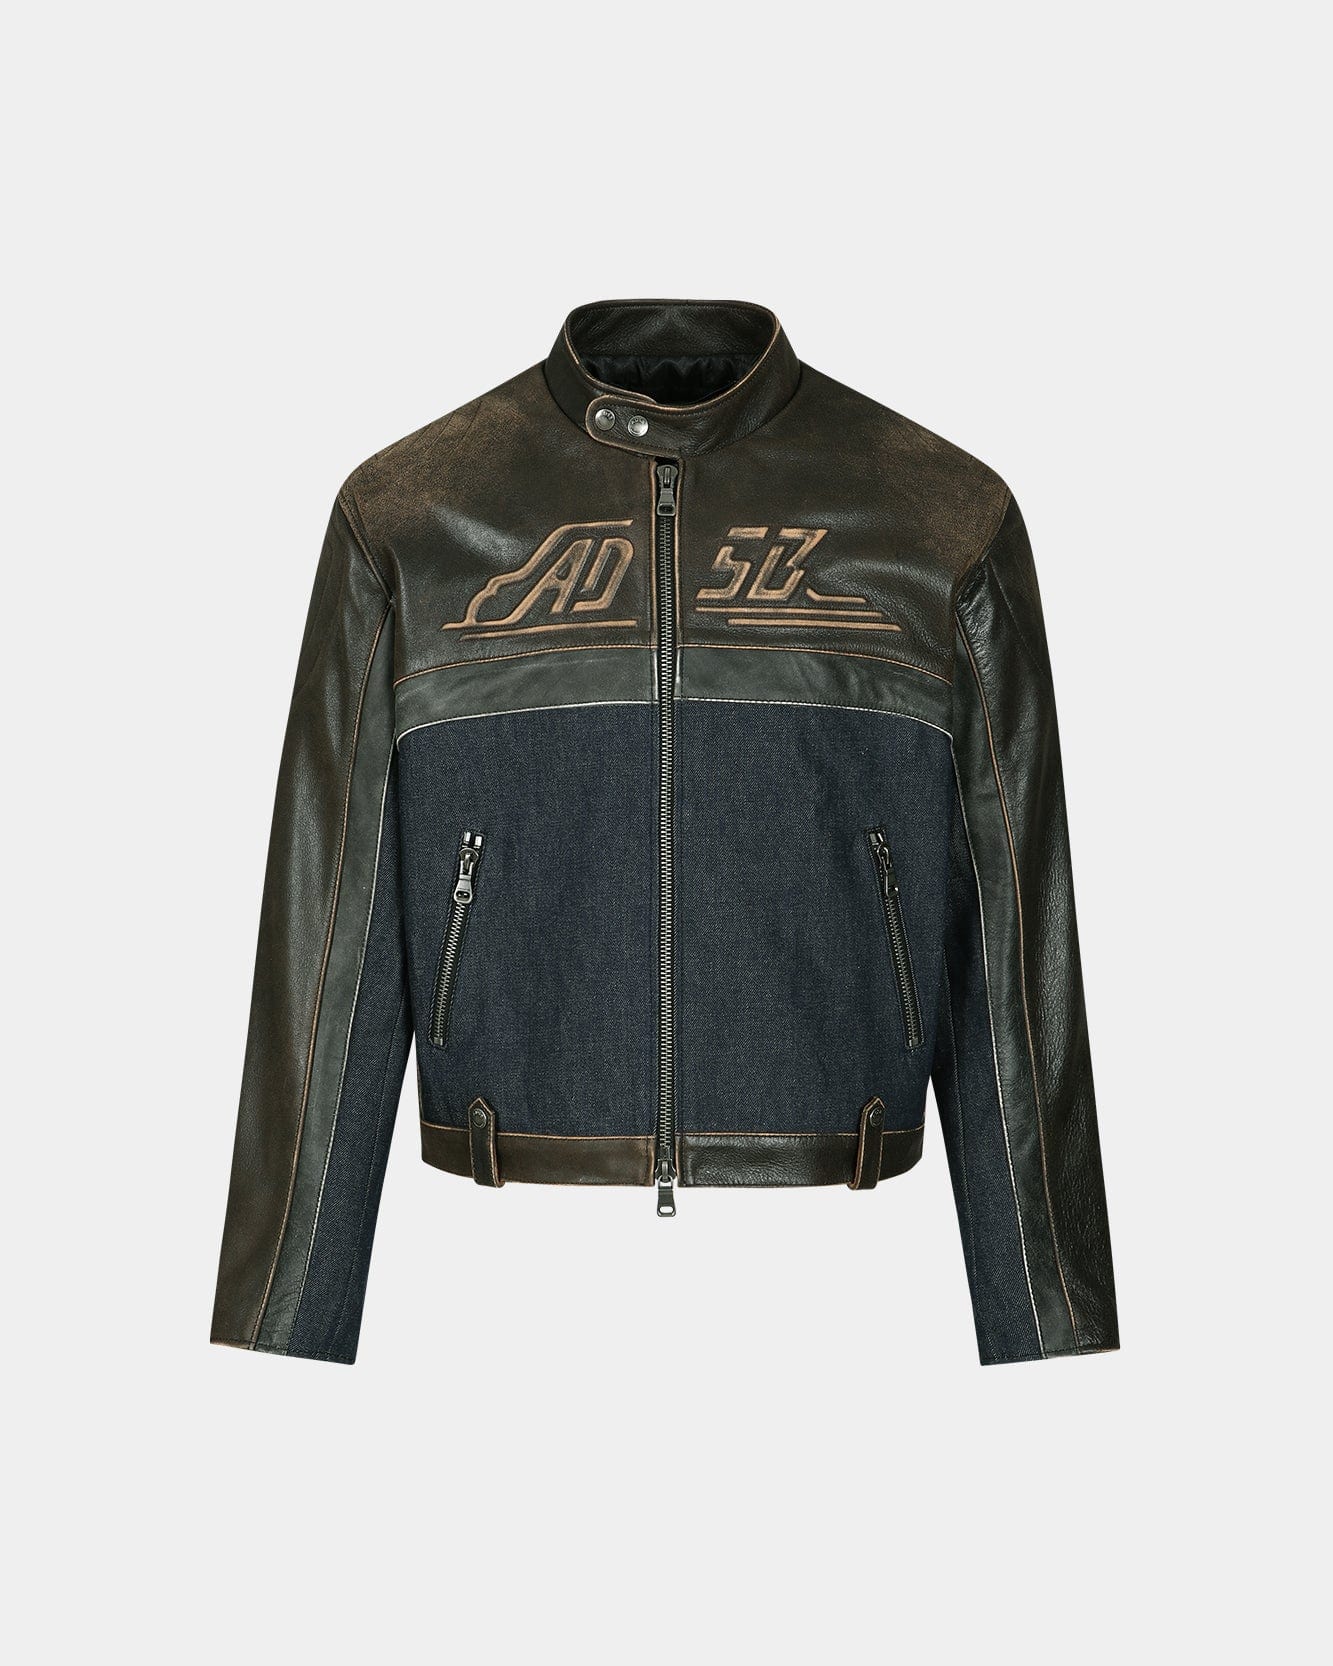 Andersson Bell 24 RACING LEATHER JACKET awa591m(BROWN)